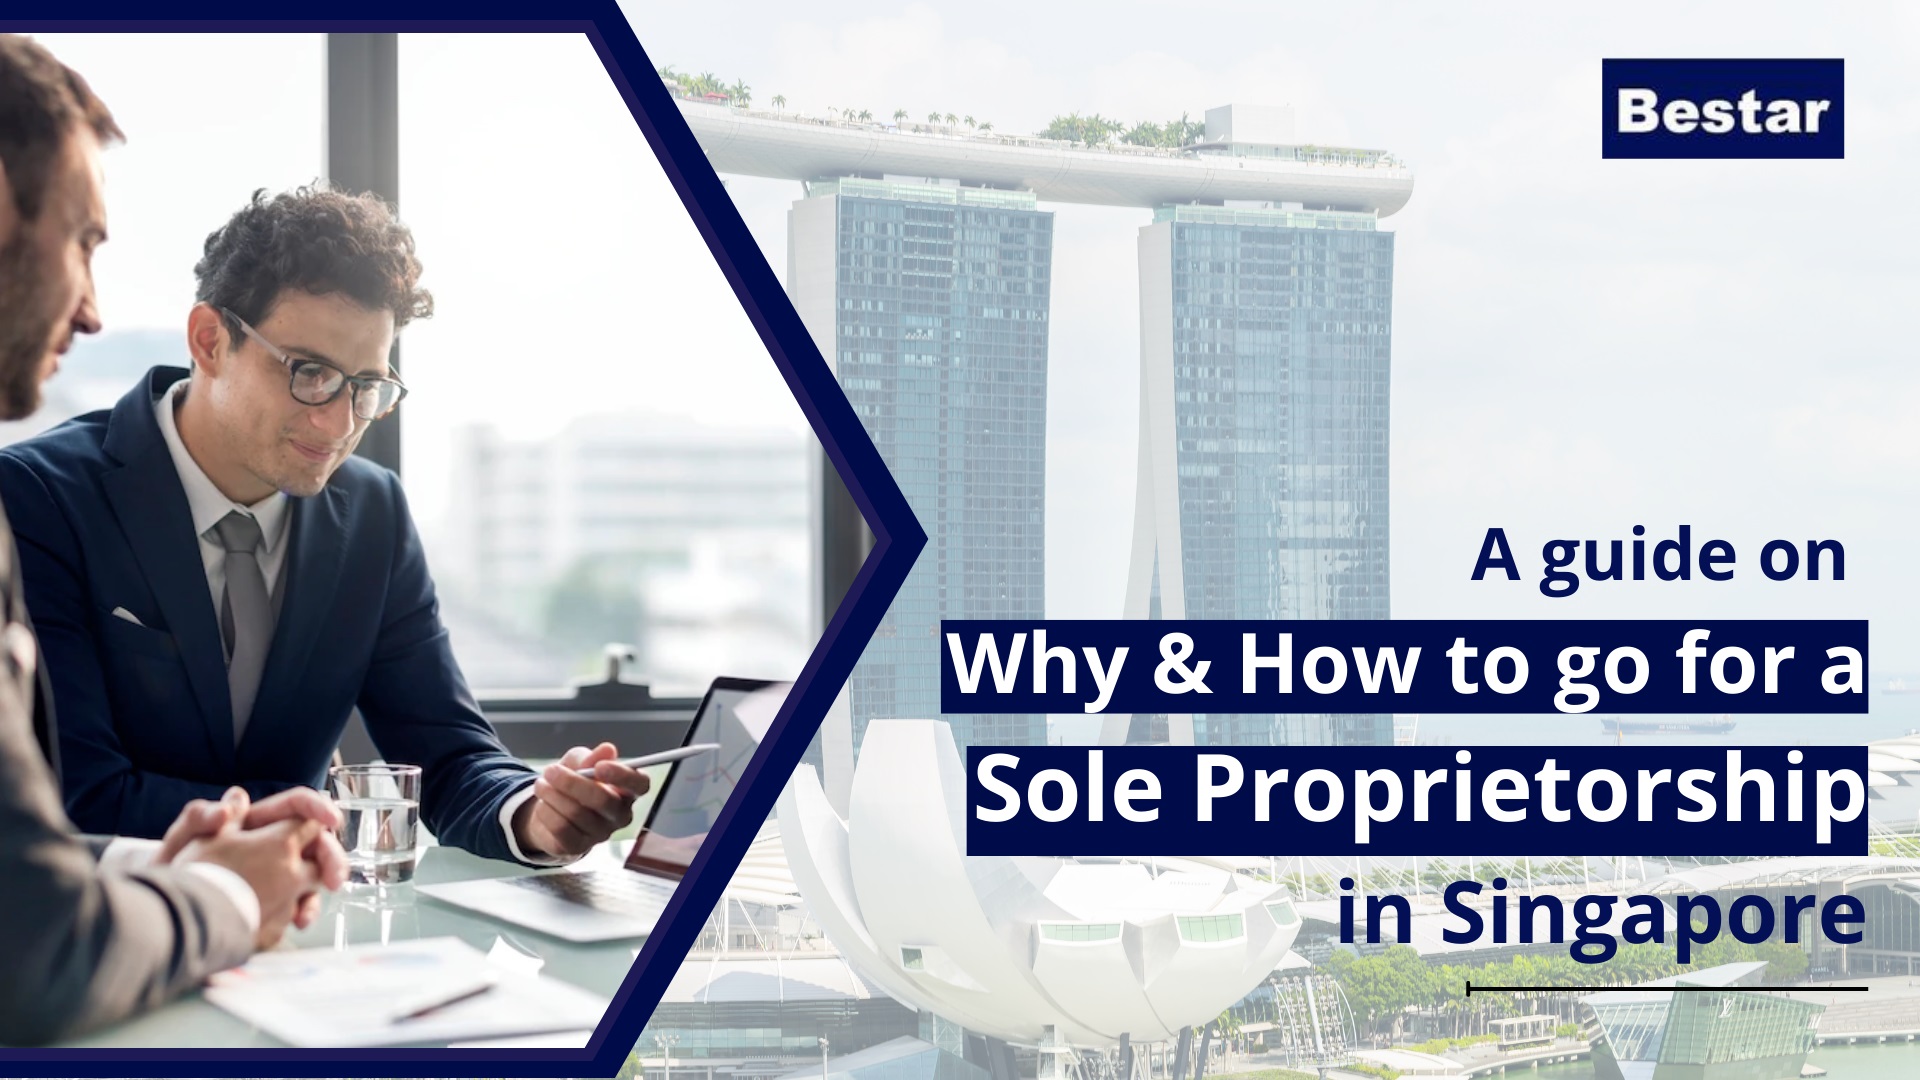 A guide on why & how to go for a Sole Proprietorship in Singapore